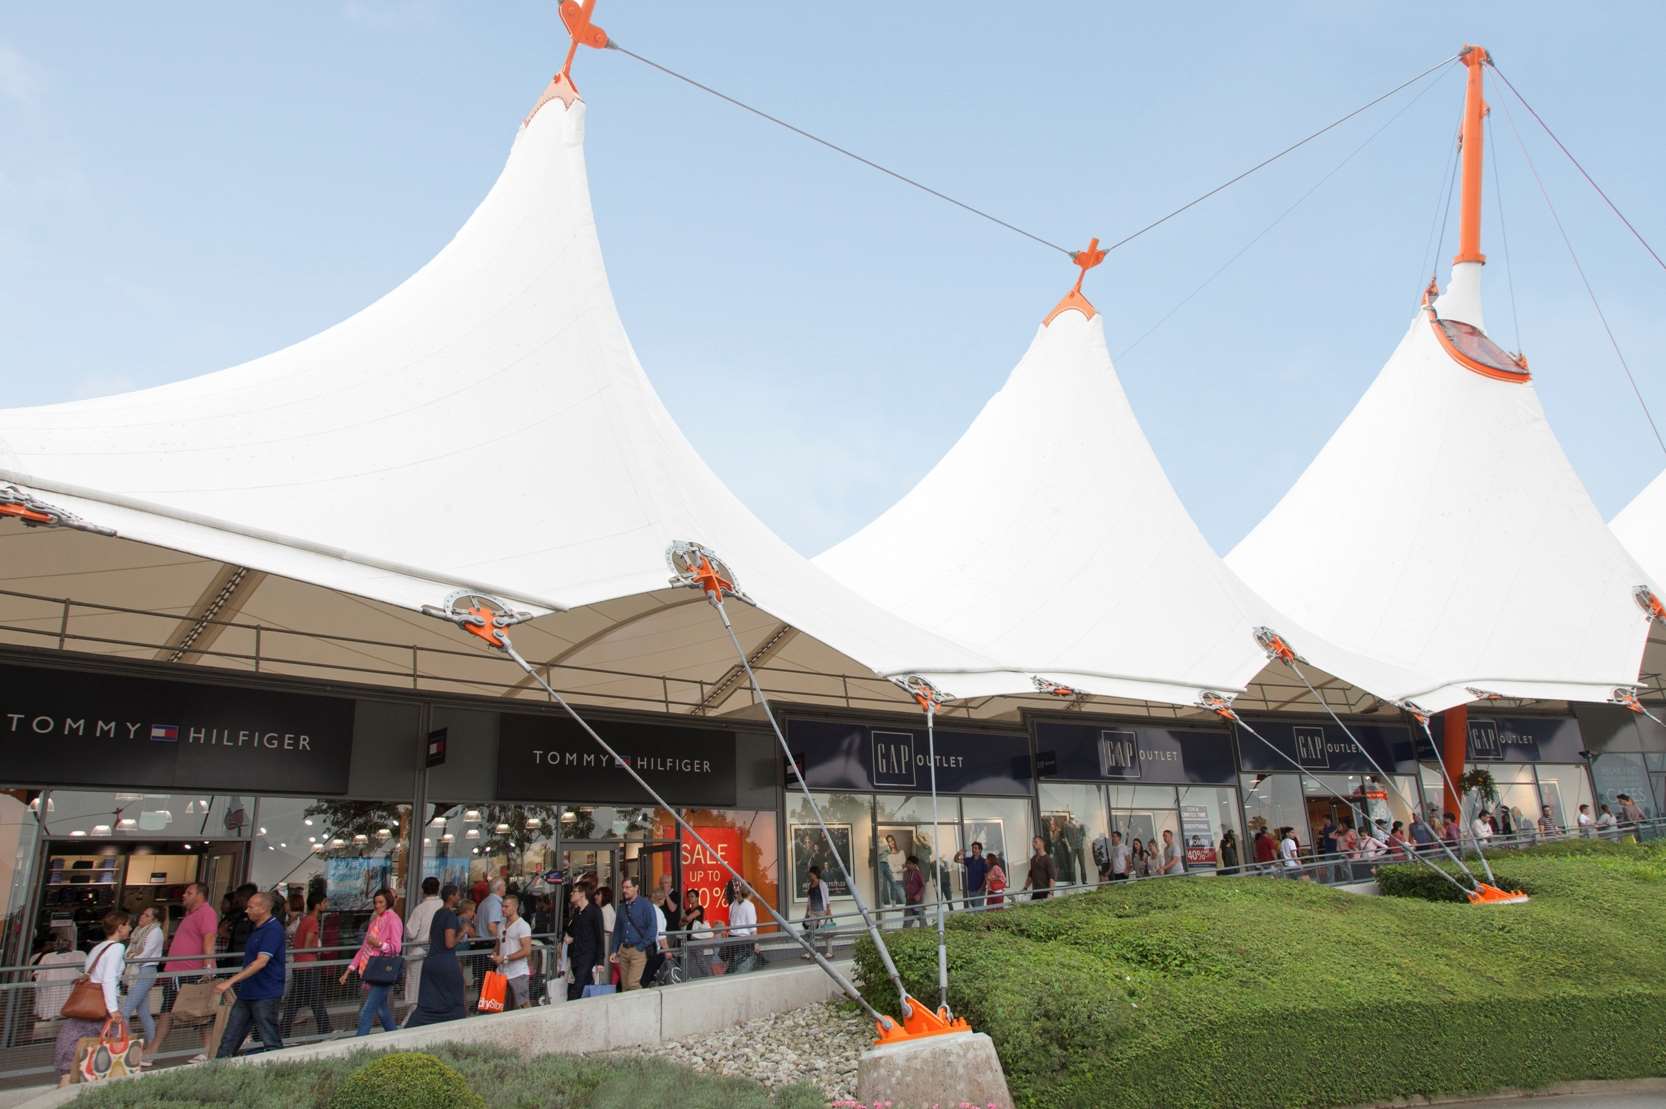 Ashford Designer Outlet recorded record sales figures last year